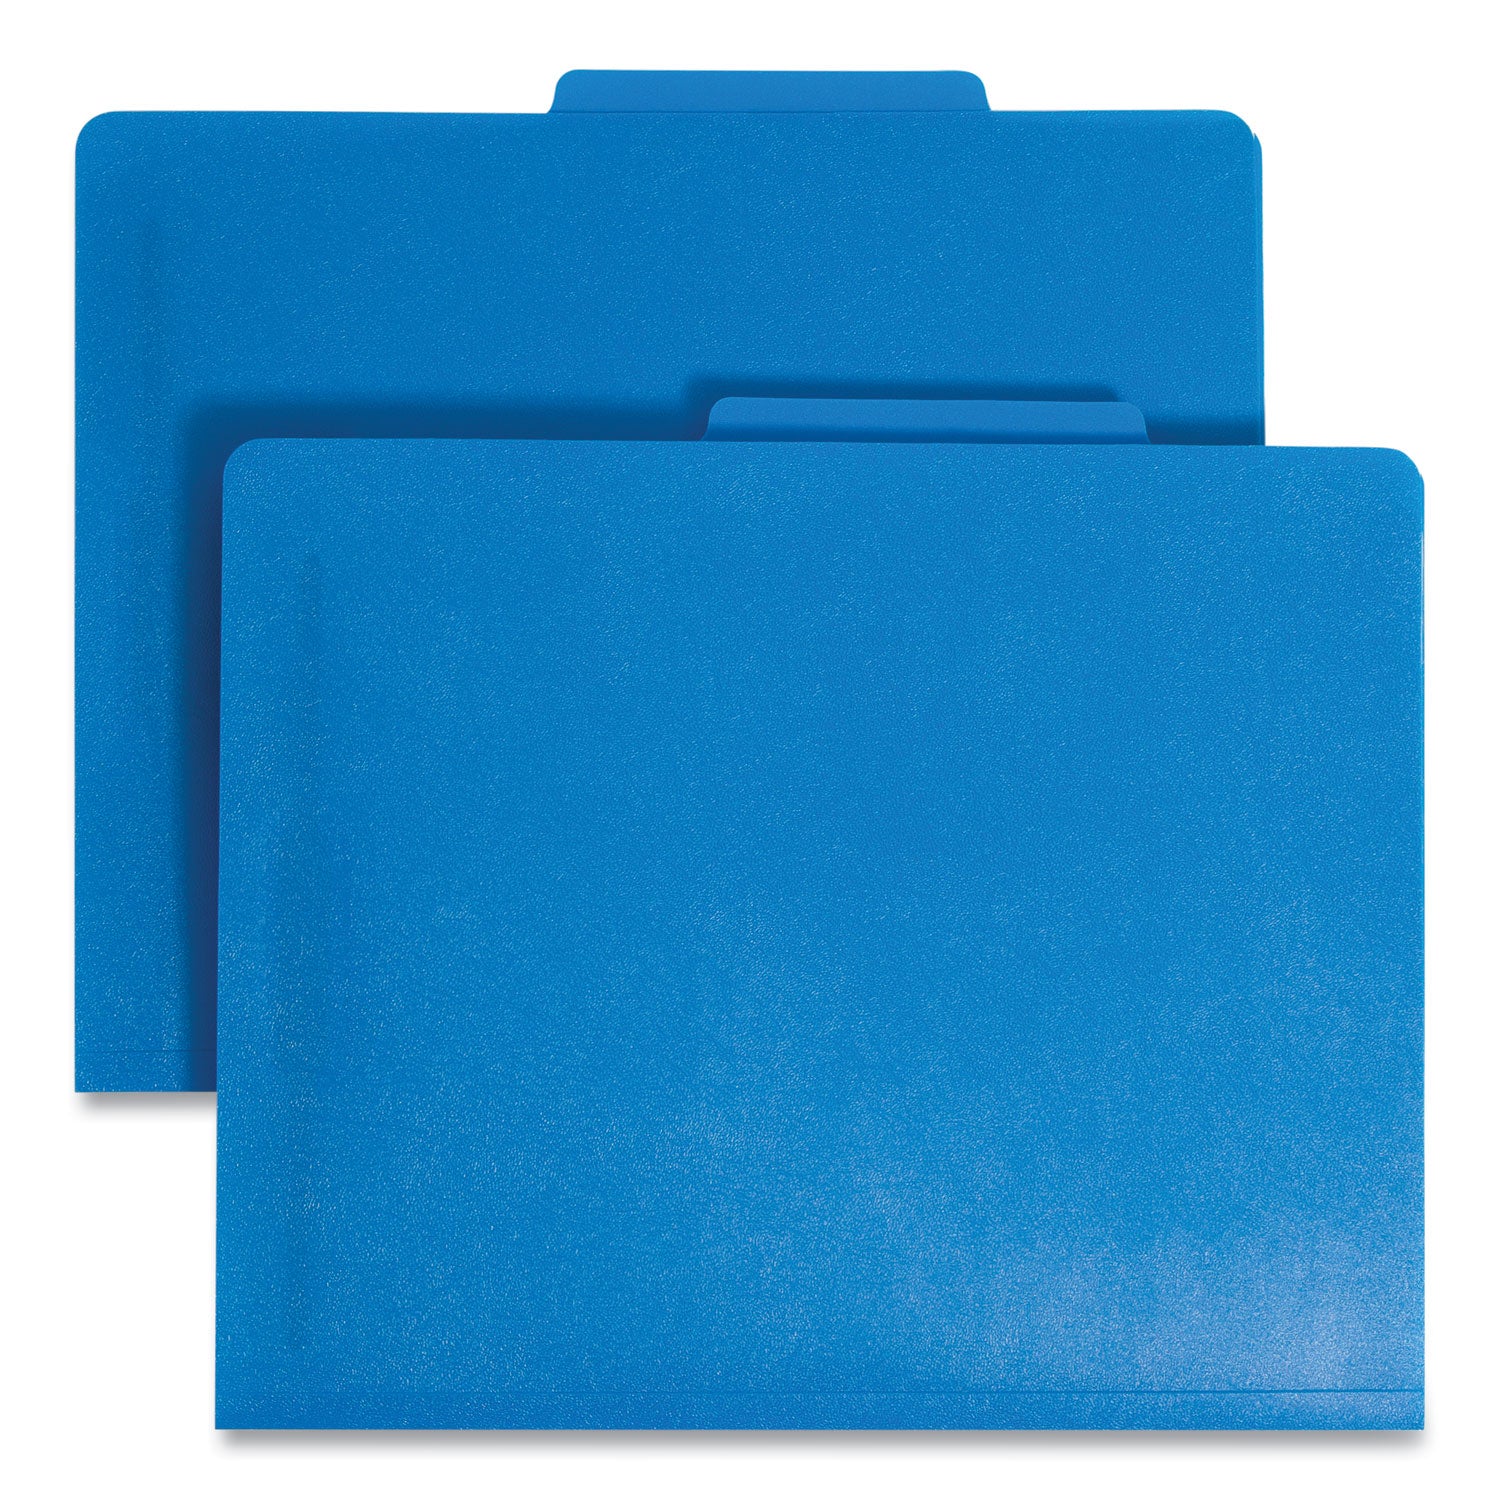 Six-Section Poly Classification Folders, 2" Expansion, 2 Dividers, 6 Fasteners, Letter Size, Blue Exterior, 10/Box - 